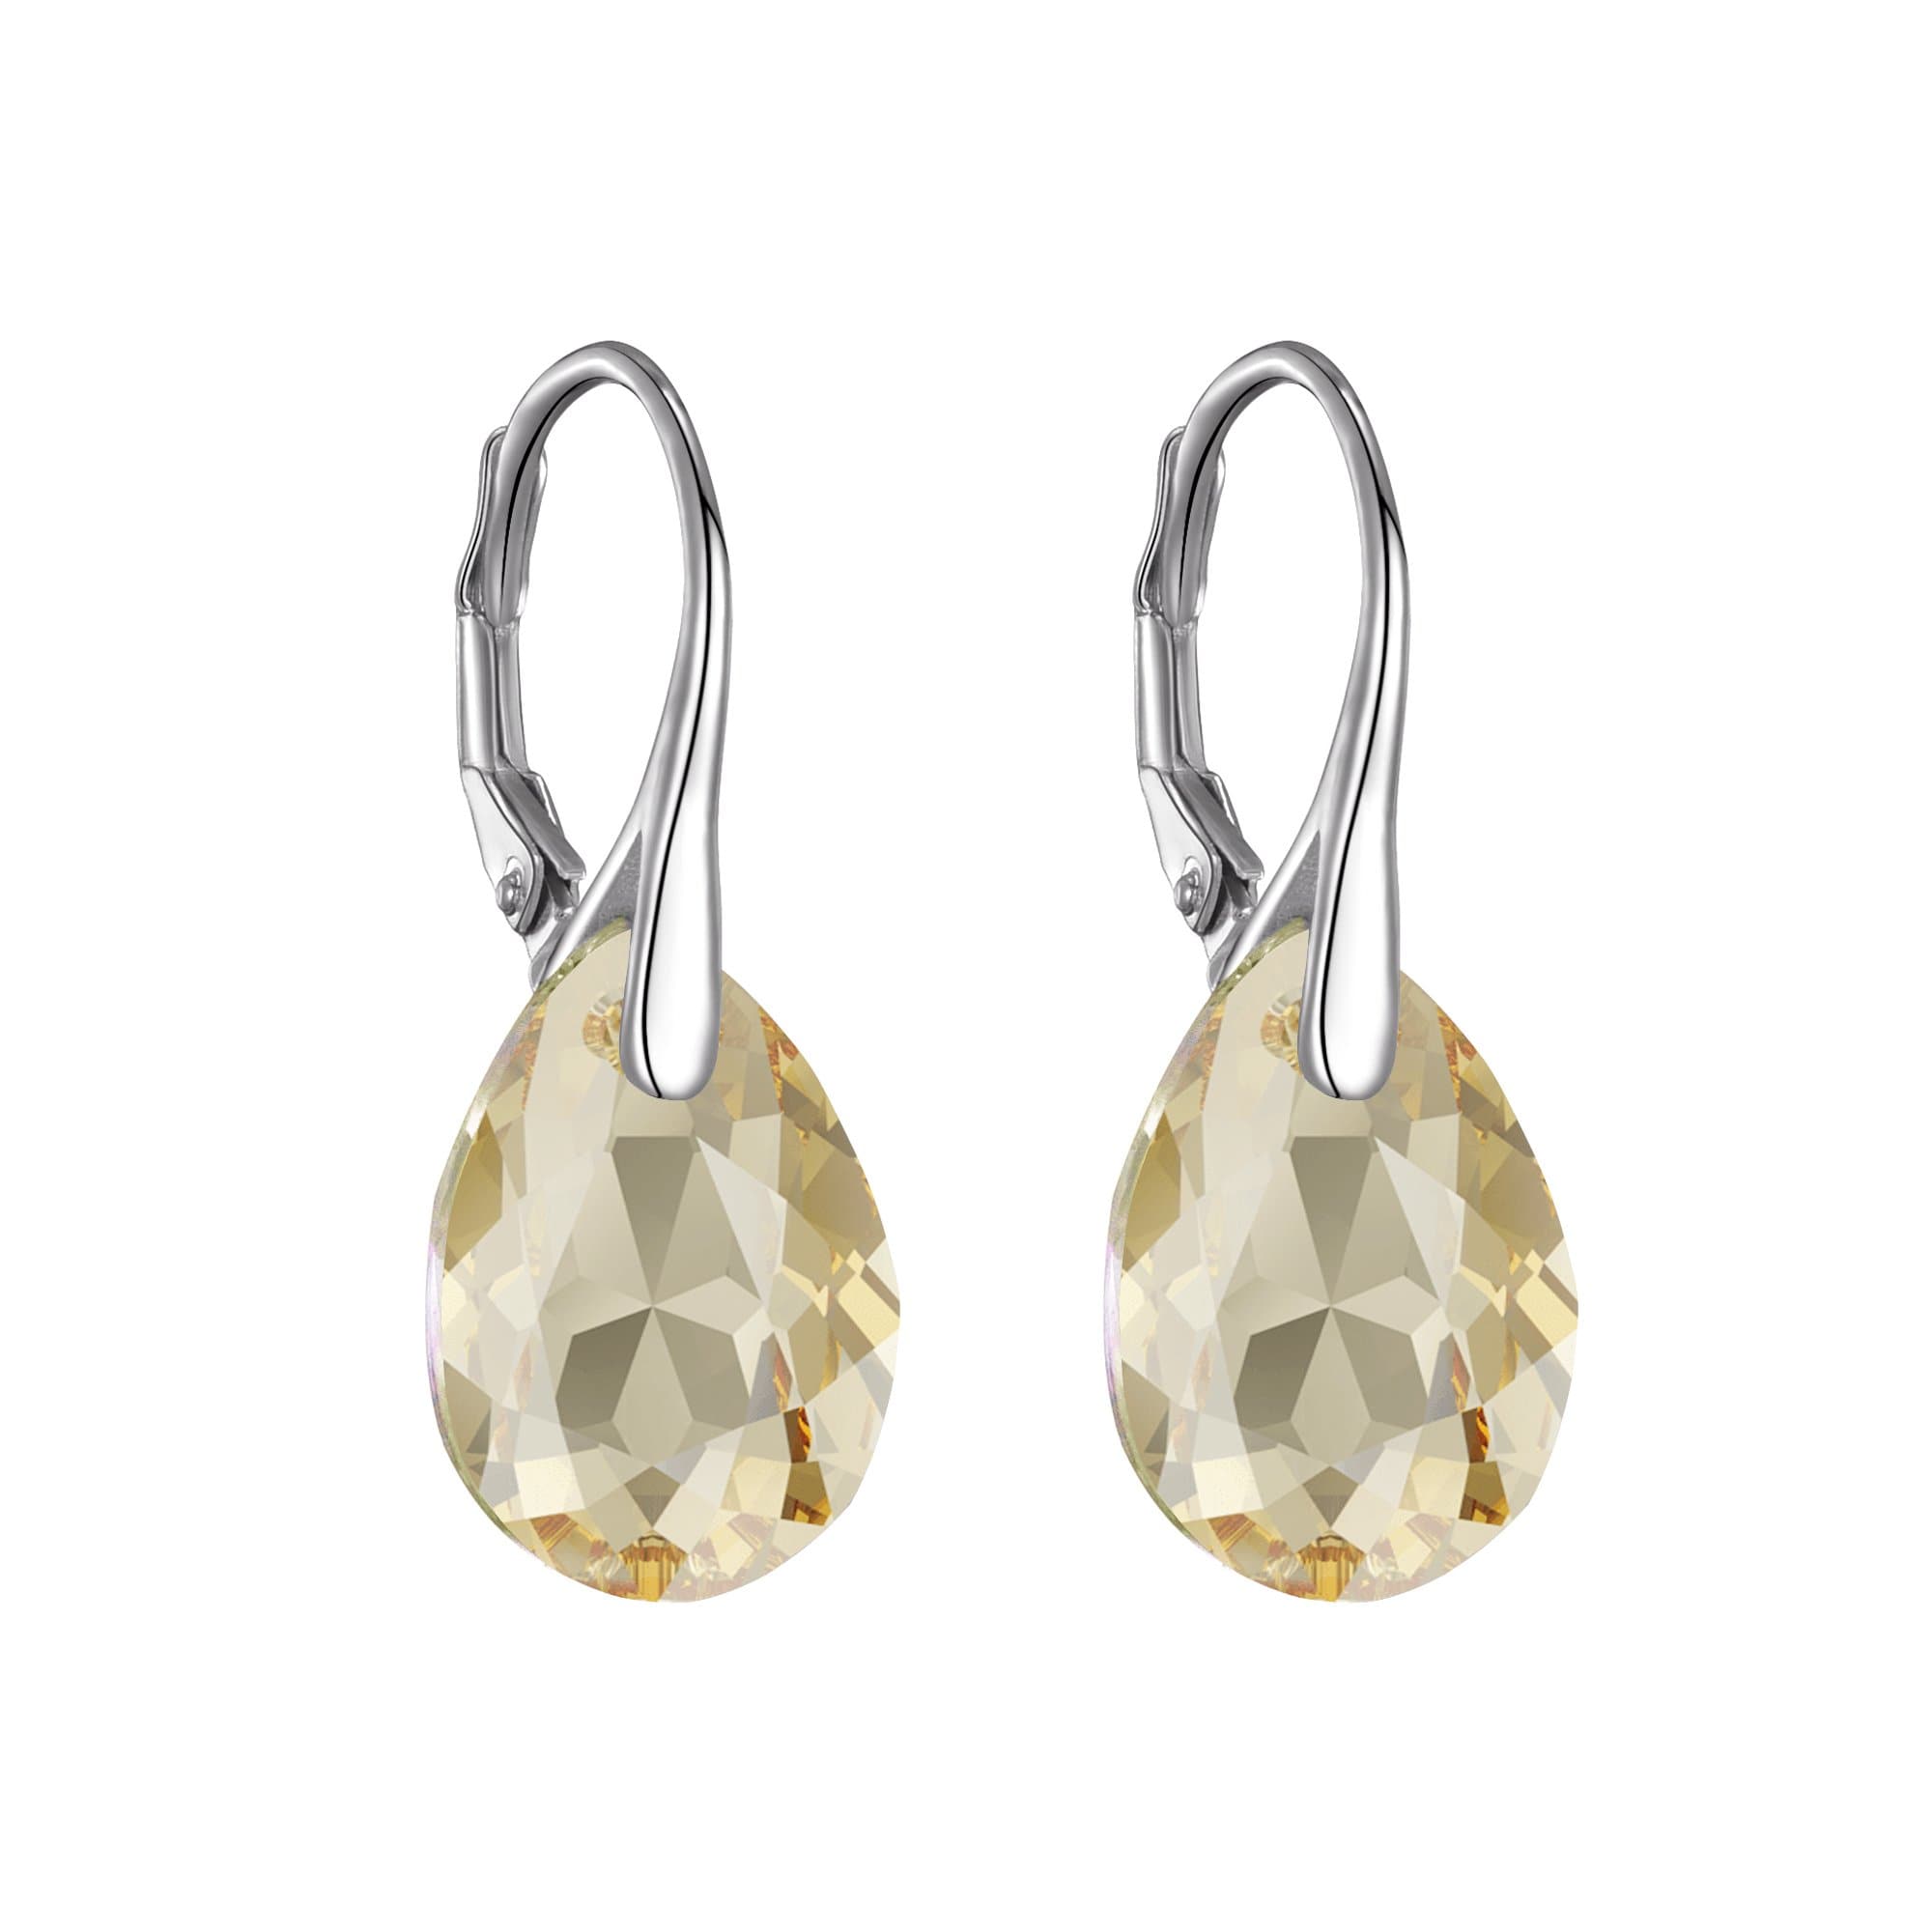 Sterling Silver Golden Shadow Drop Earrings Created with Zircondia® Crystals by Philip Jones Jewellery